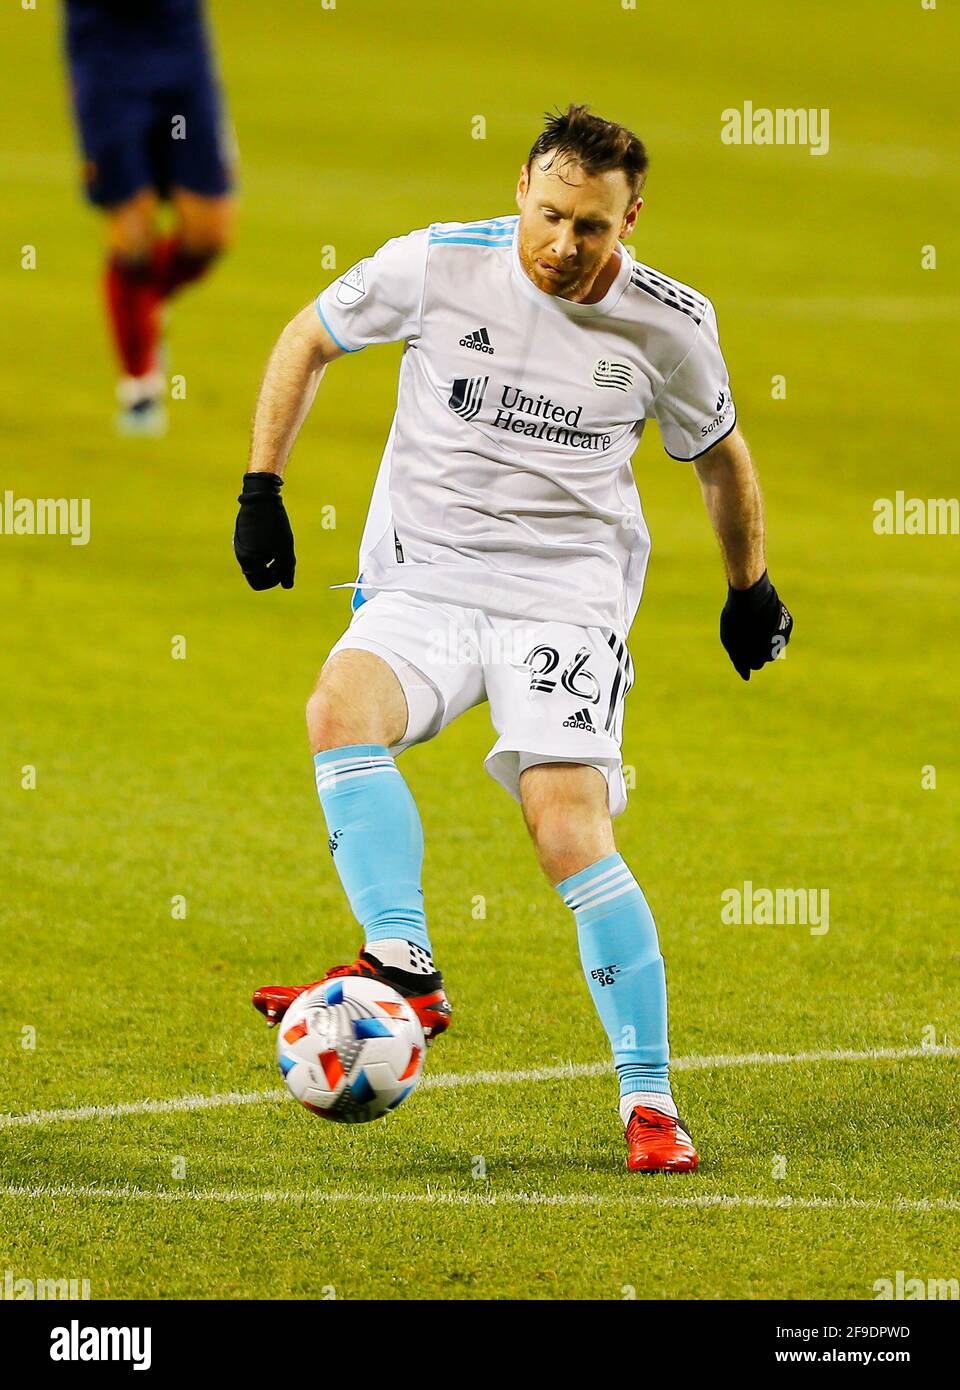 Chicago, USA, 17 April 2021. Major League Soccer (MLS) New England Revolution midfielder Tommy McNamara handles the ball against the Chicago Fire FC at Soldier Field in Chicago, IL, USA. Match ended 2-2. Credit: Tony Gadomski / All Sport Imaging / Alamy Live News Stock Photo